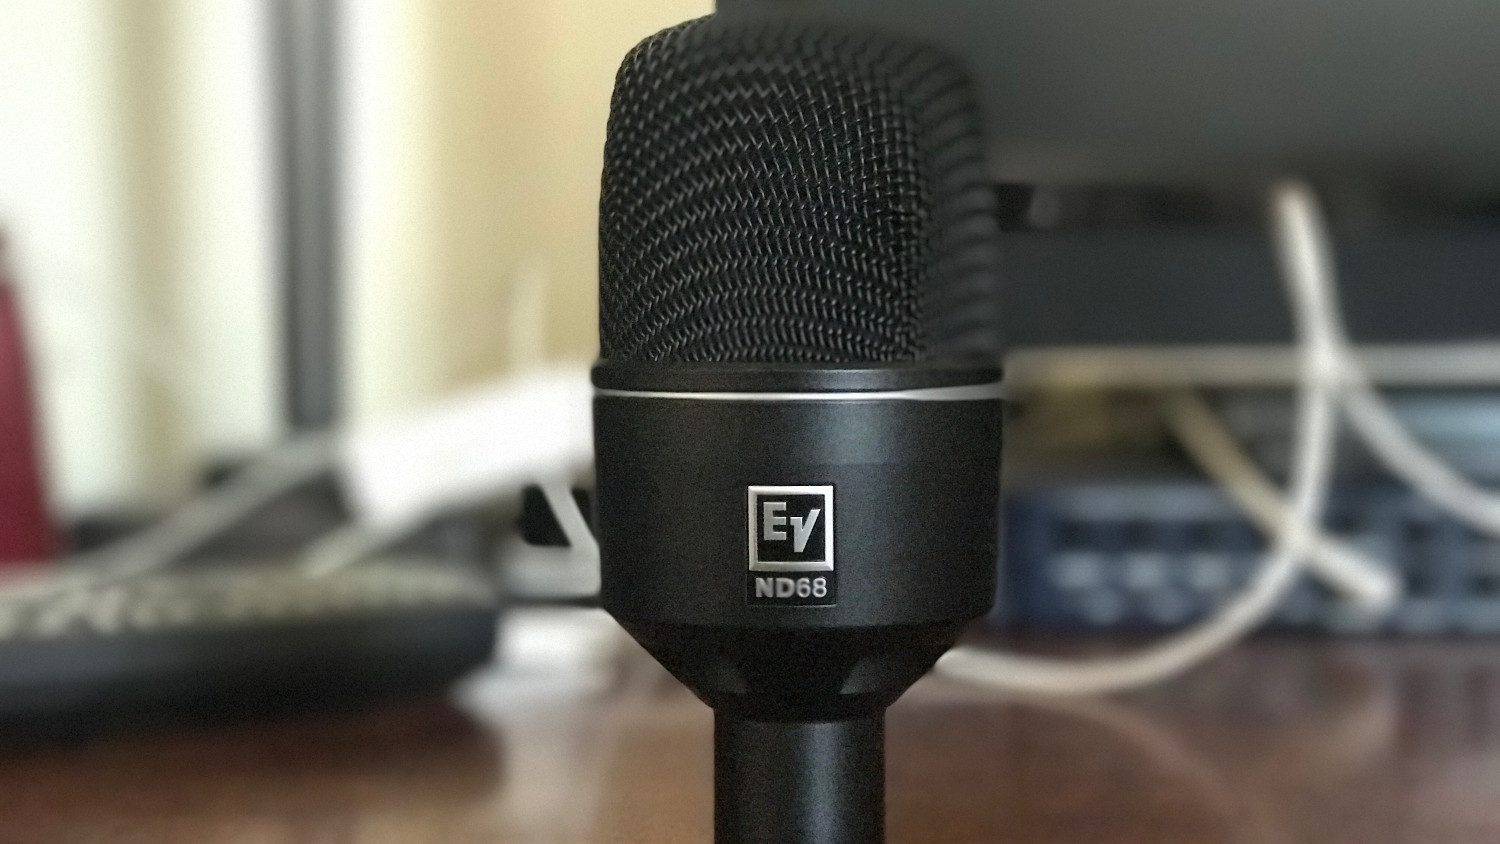 Electro-Voice ND68 dynamic microphone review